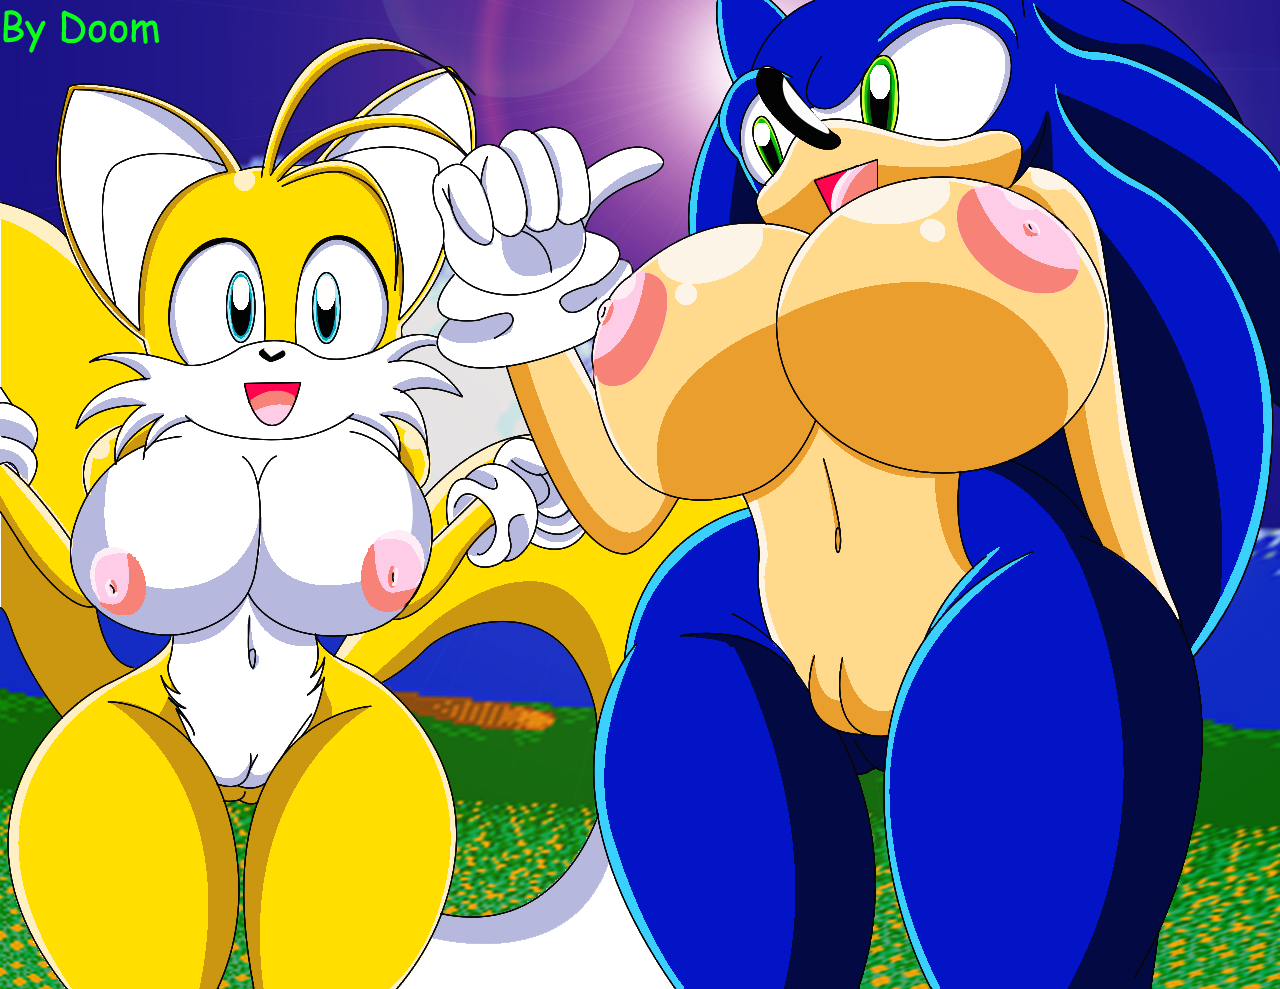 Read [doom Nobody147] Sonic And Tails Series Sonic The Hedgehog Hentai Online Porn Manga And